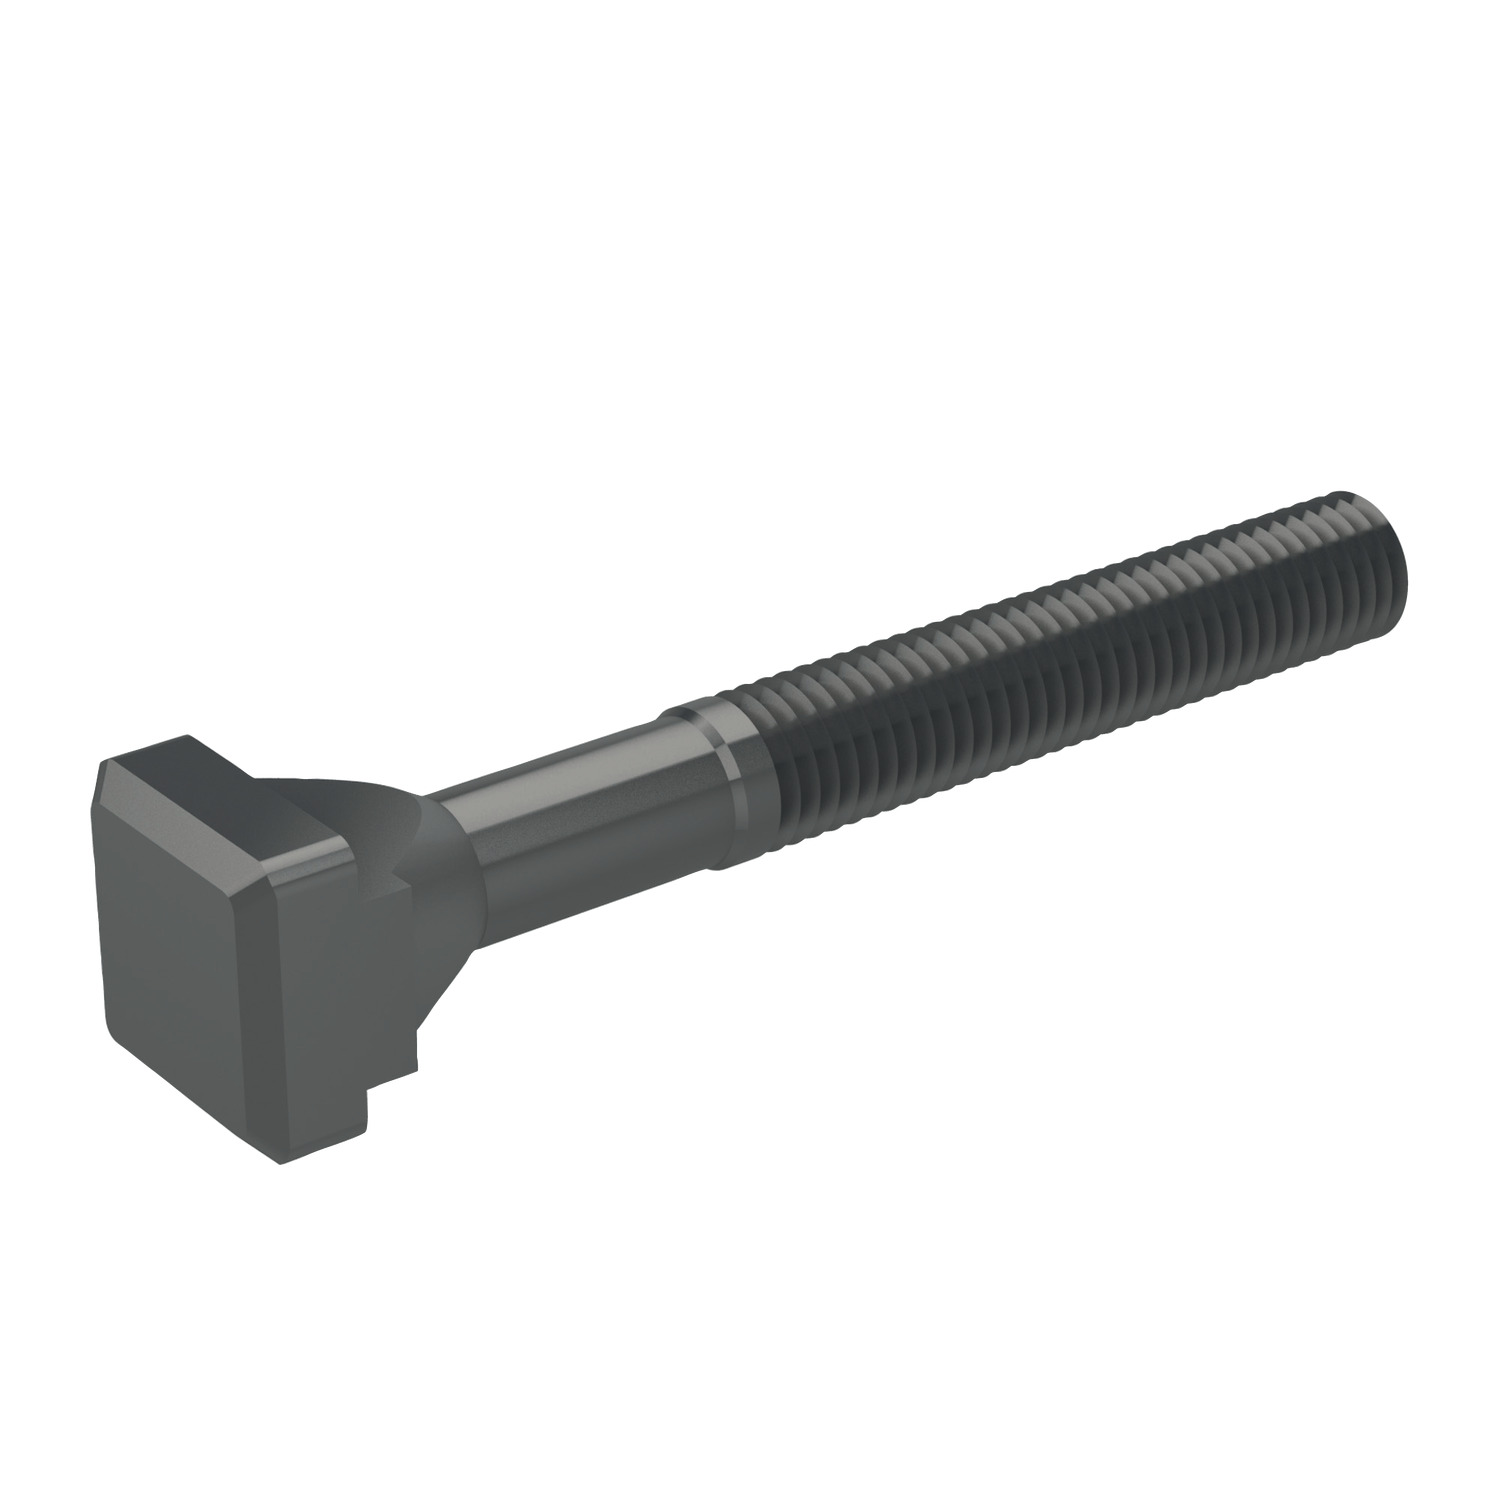 T-Slot Bolts T-Sllot Bolts, extra strength - class 12,9. Forged steel, rolled threads. For use where higher clamping forces are required.